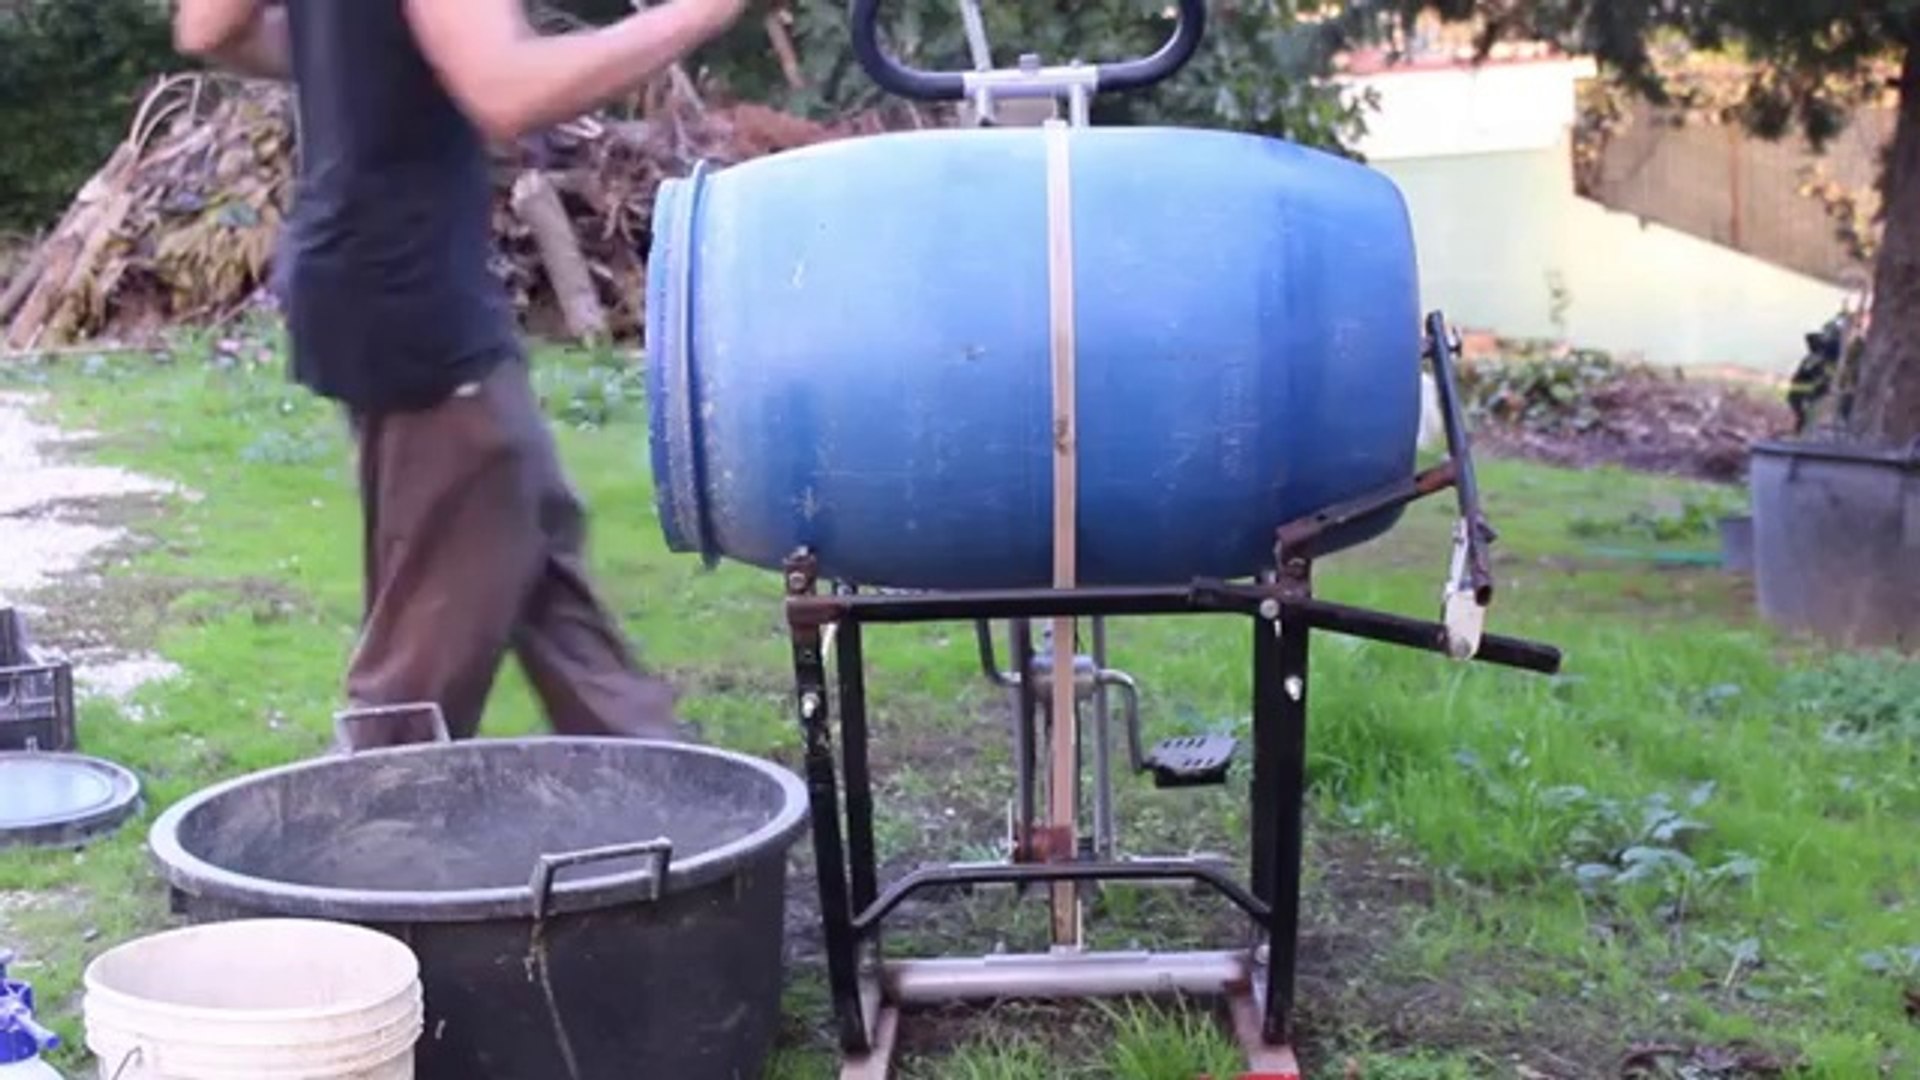 Homemade ecologic cement mixer to make seed balls - video Dailymotion